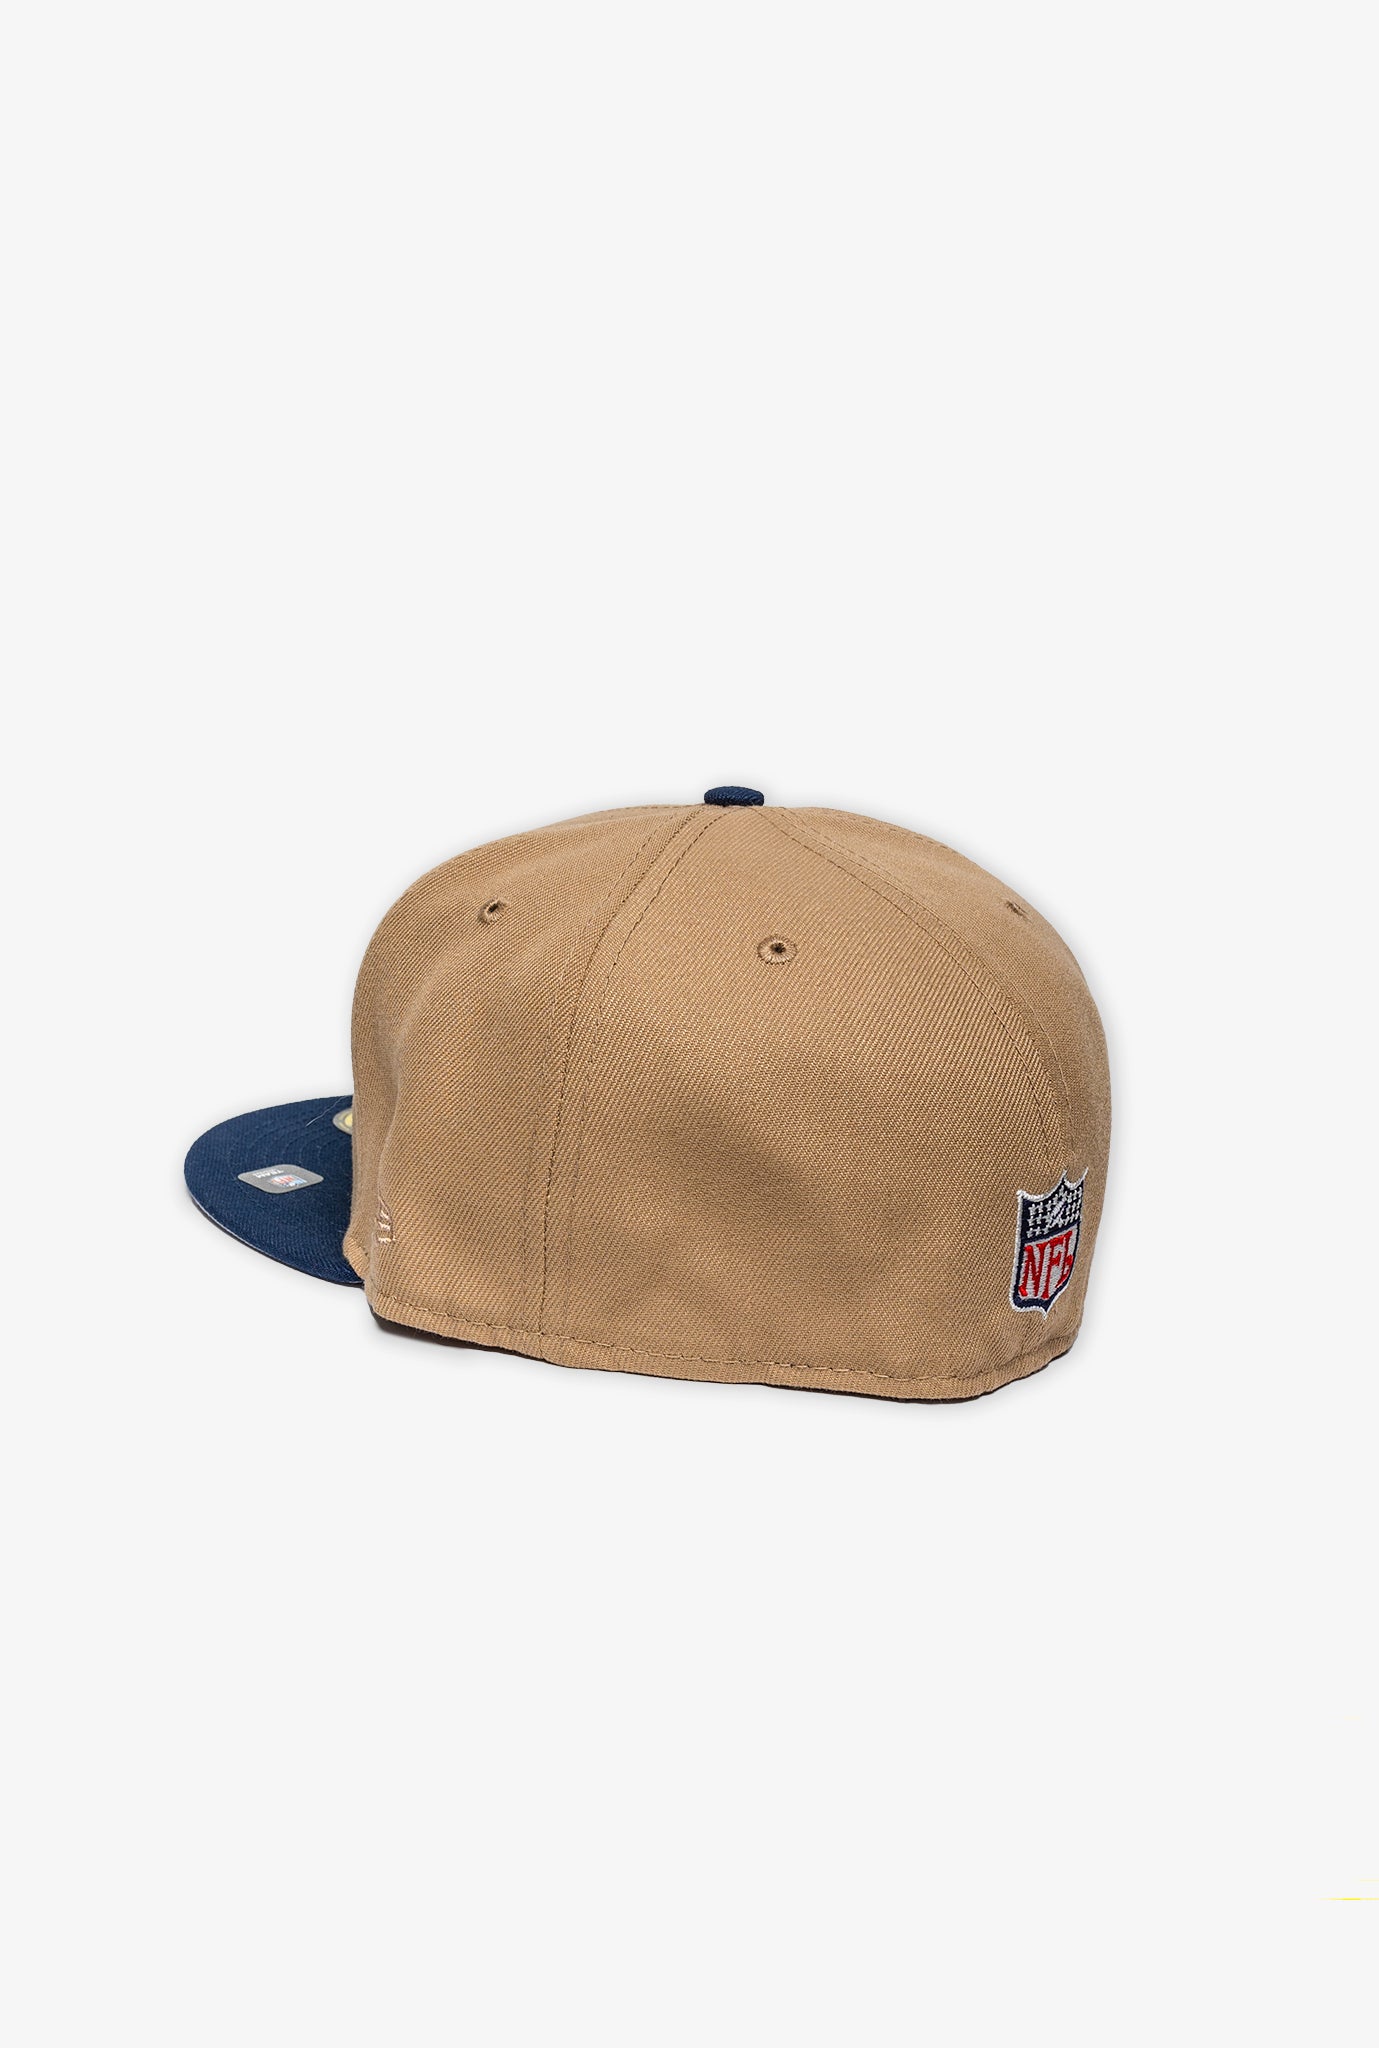 New England Patriots 50th Anniversary 59FIFTY - Camel Oceanside